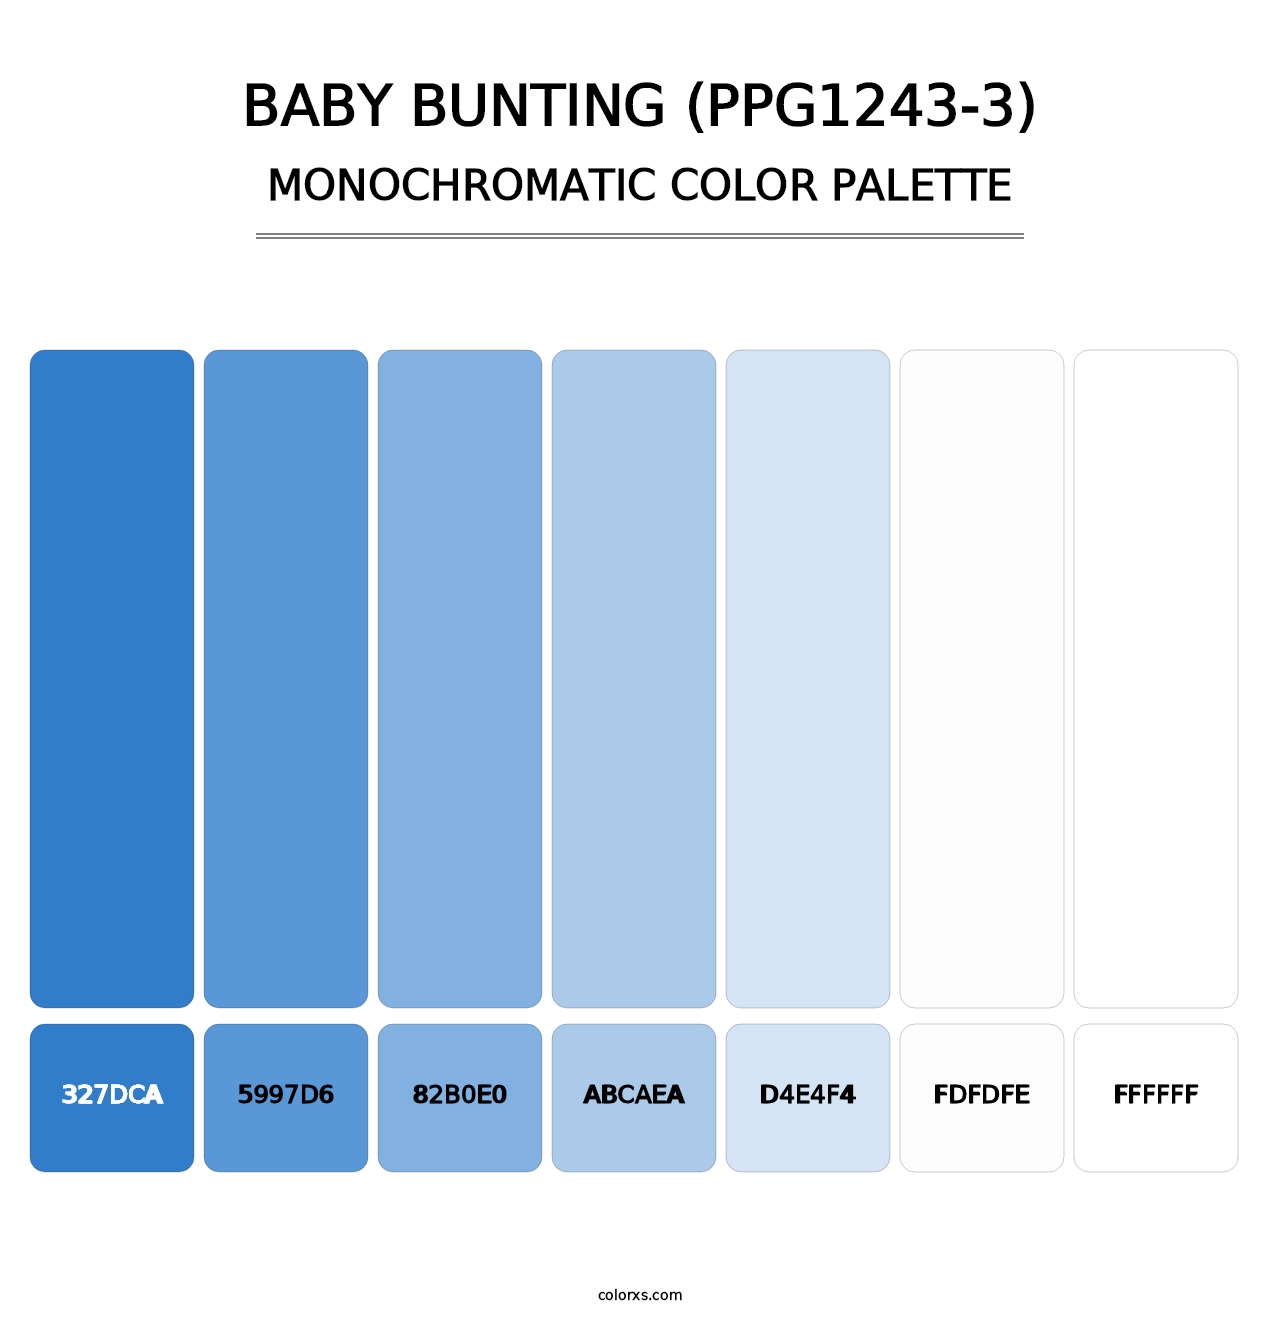 Baby Bunting (PPG1243-3) - Monochromatic Color Palette